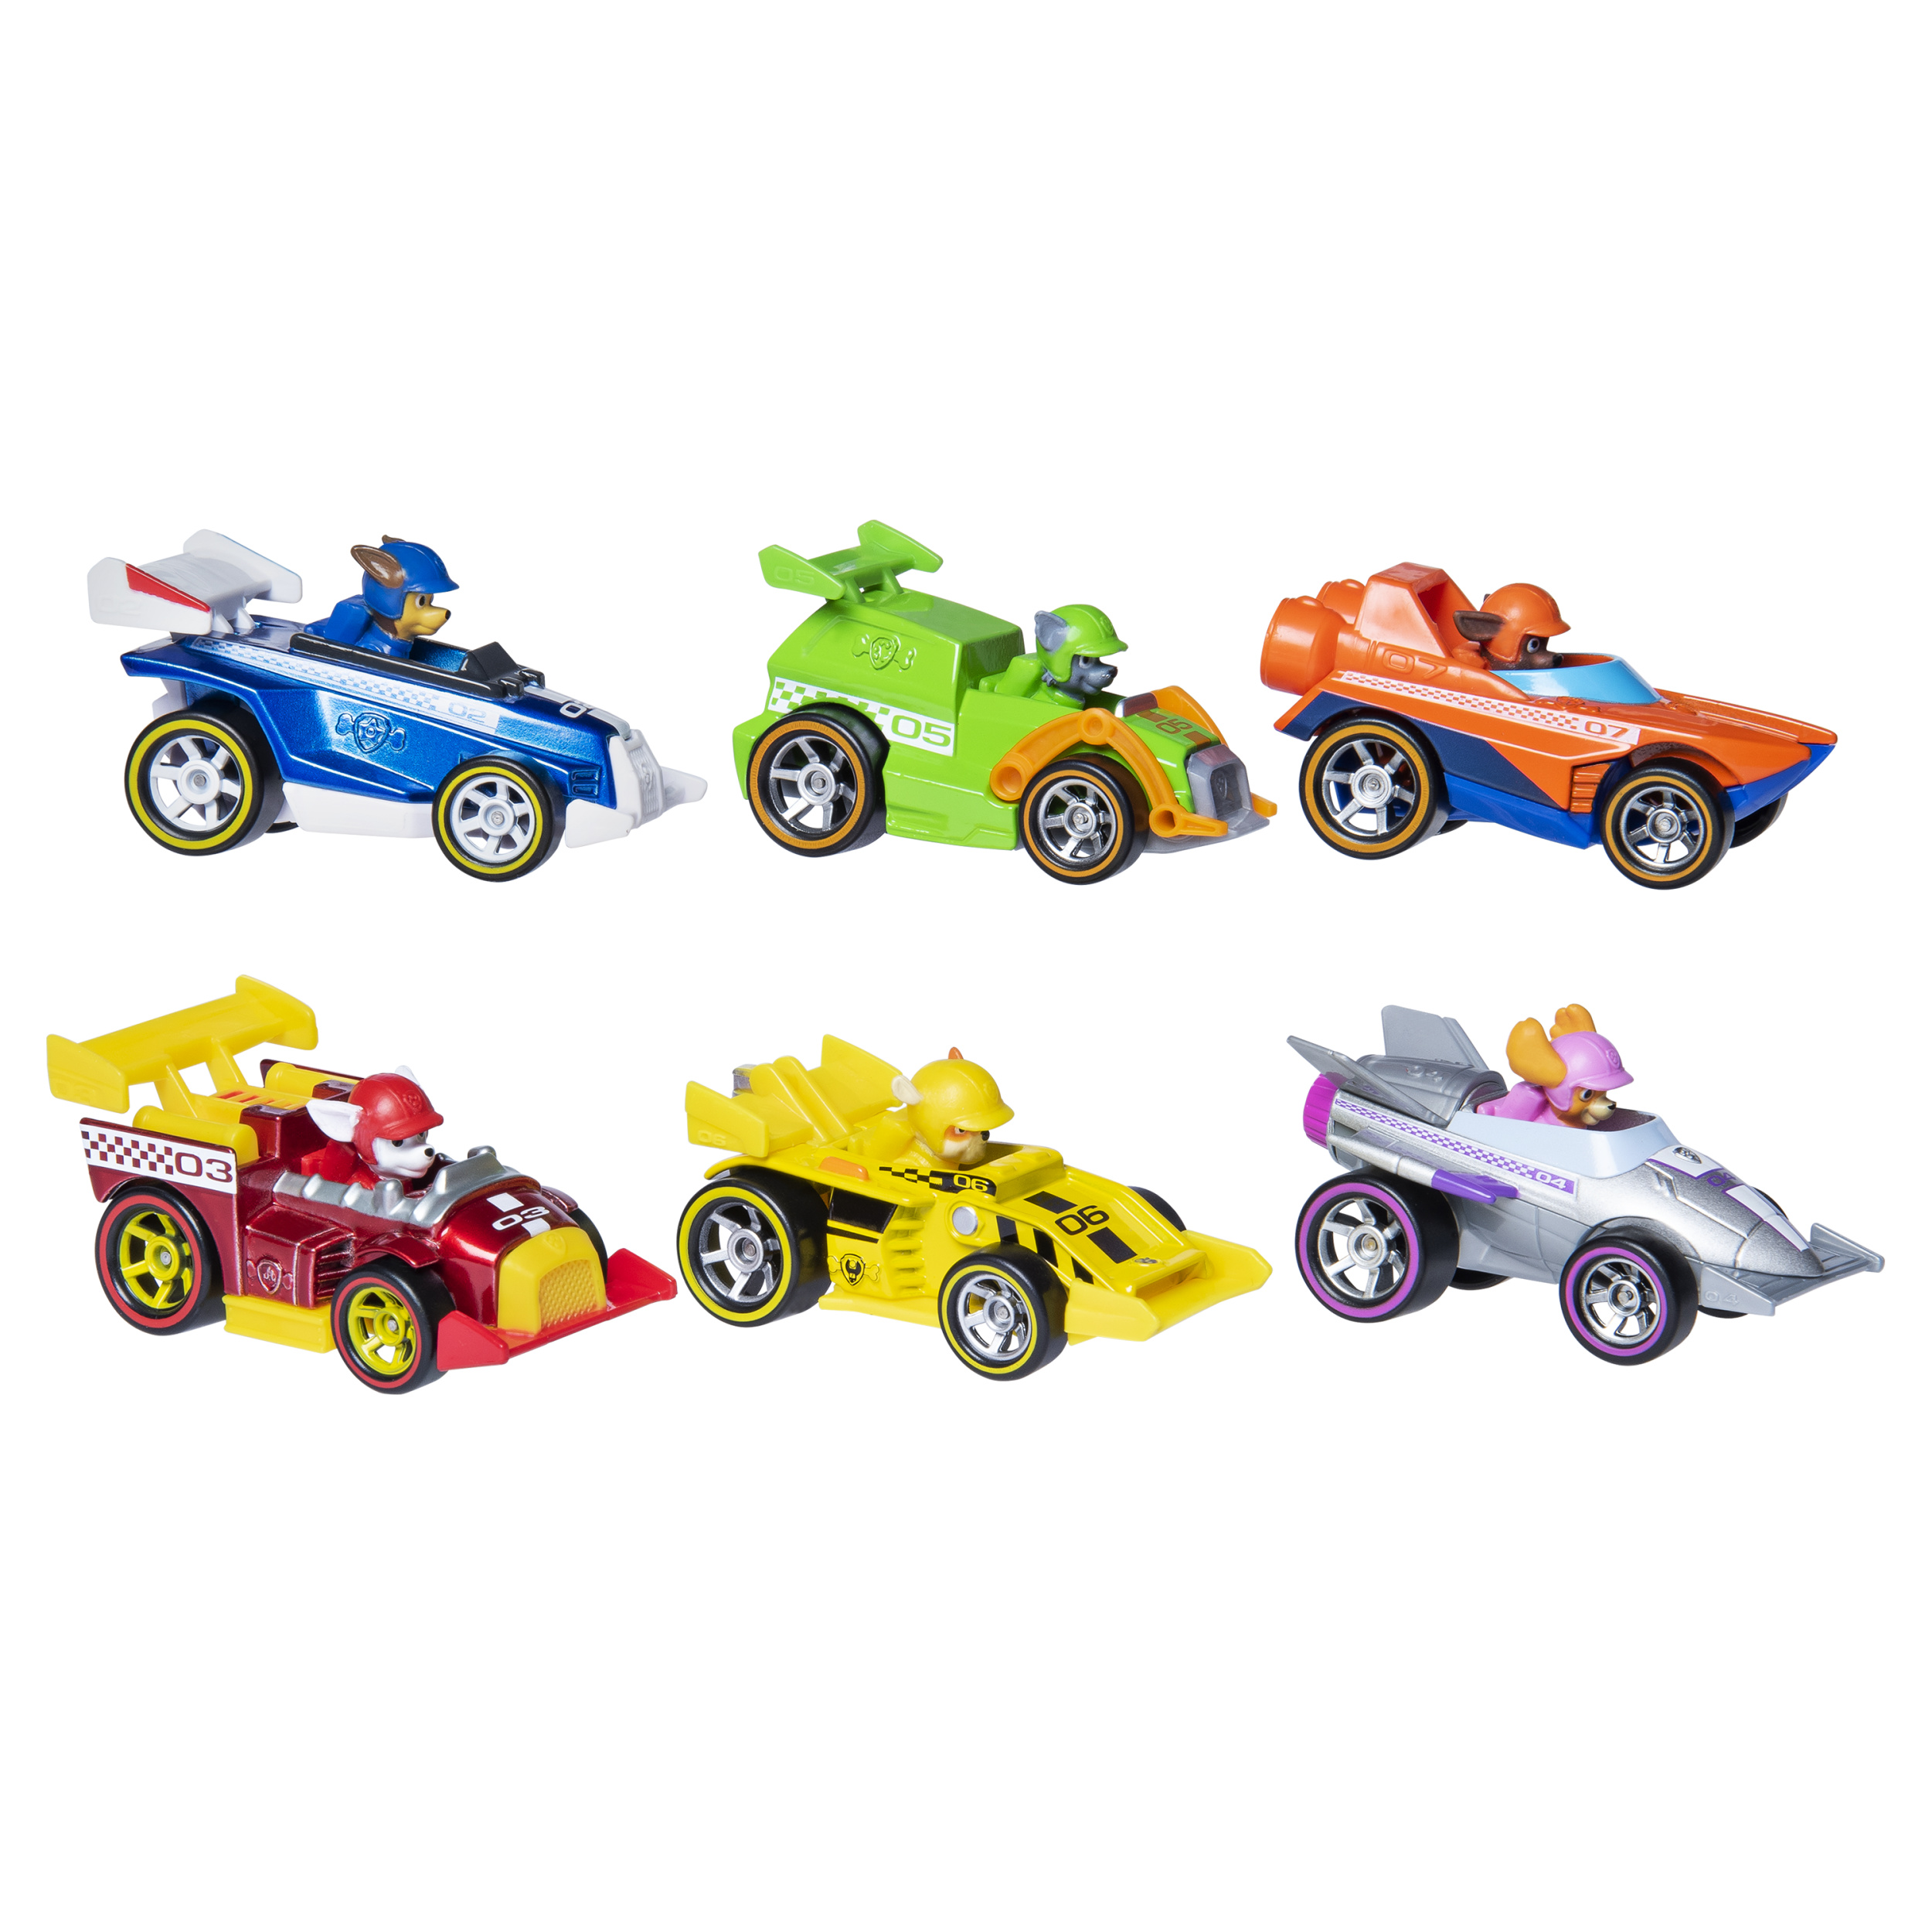 PAW Patrol, True Metal Ready Race Rescue Gift Pack of 6 Race Car Collectible Die-Cast Vehicles, 1:55 Scale - image 4 of 5